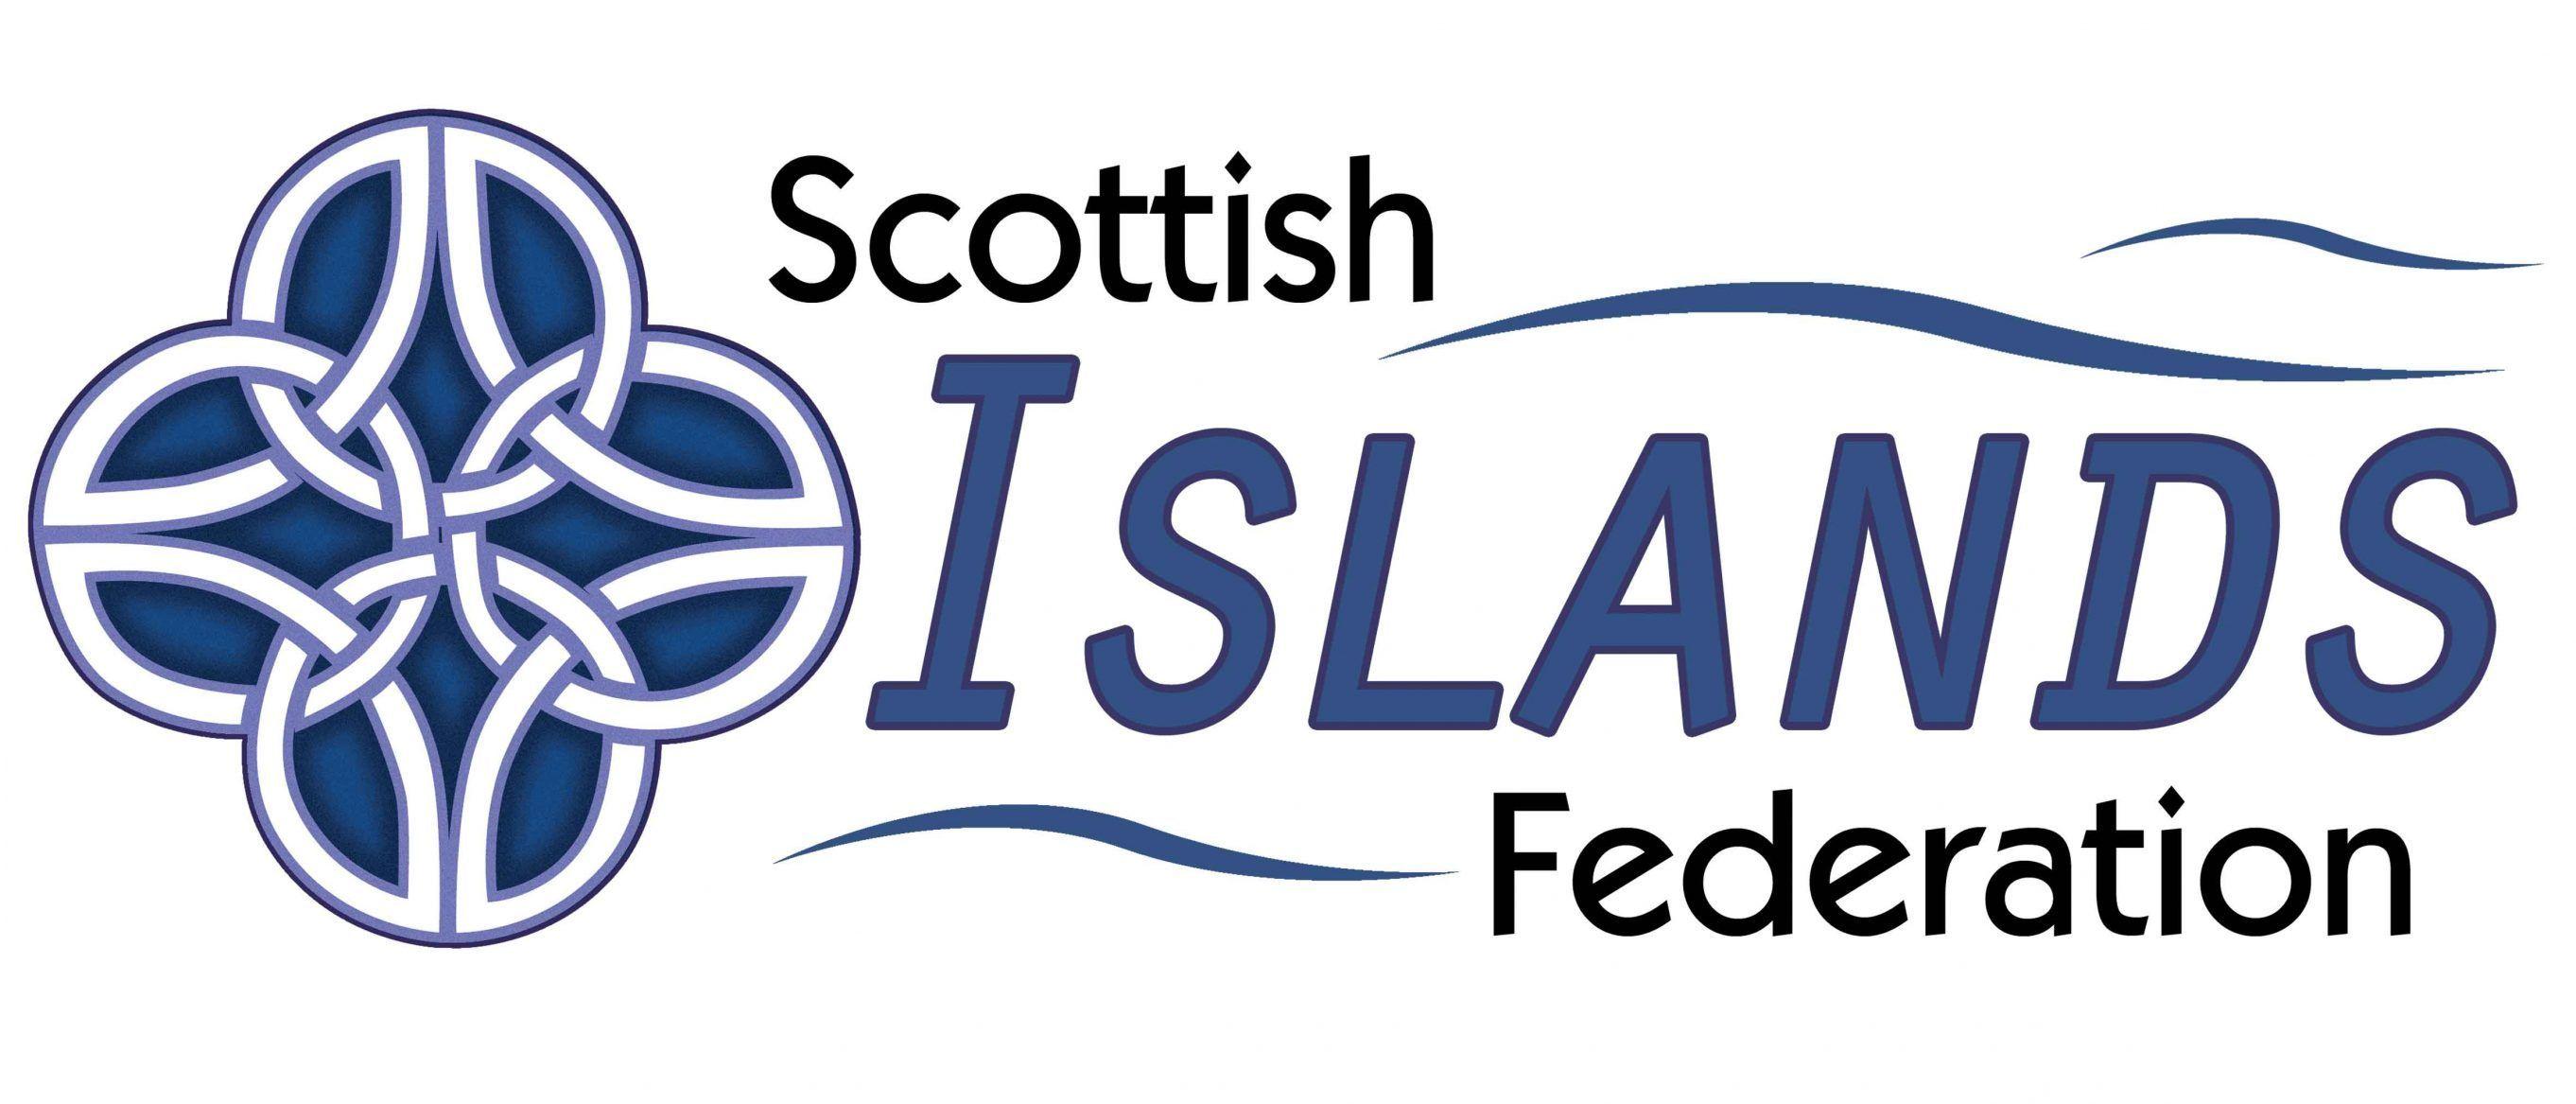 The Federation Logo - THE SCOTTISH ISLANDS FEDERATION. THE VOICE OF COMMUNITY